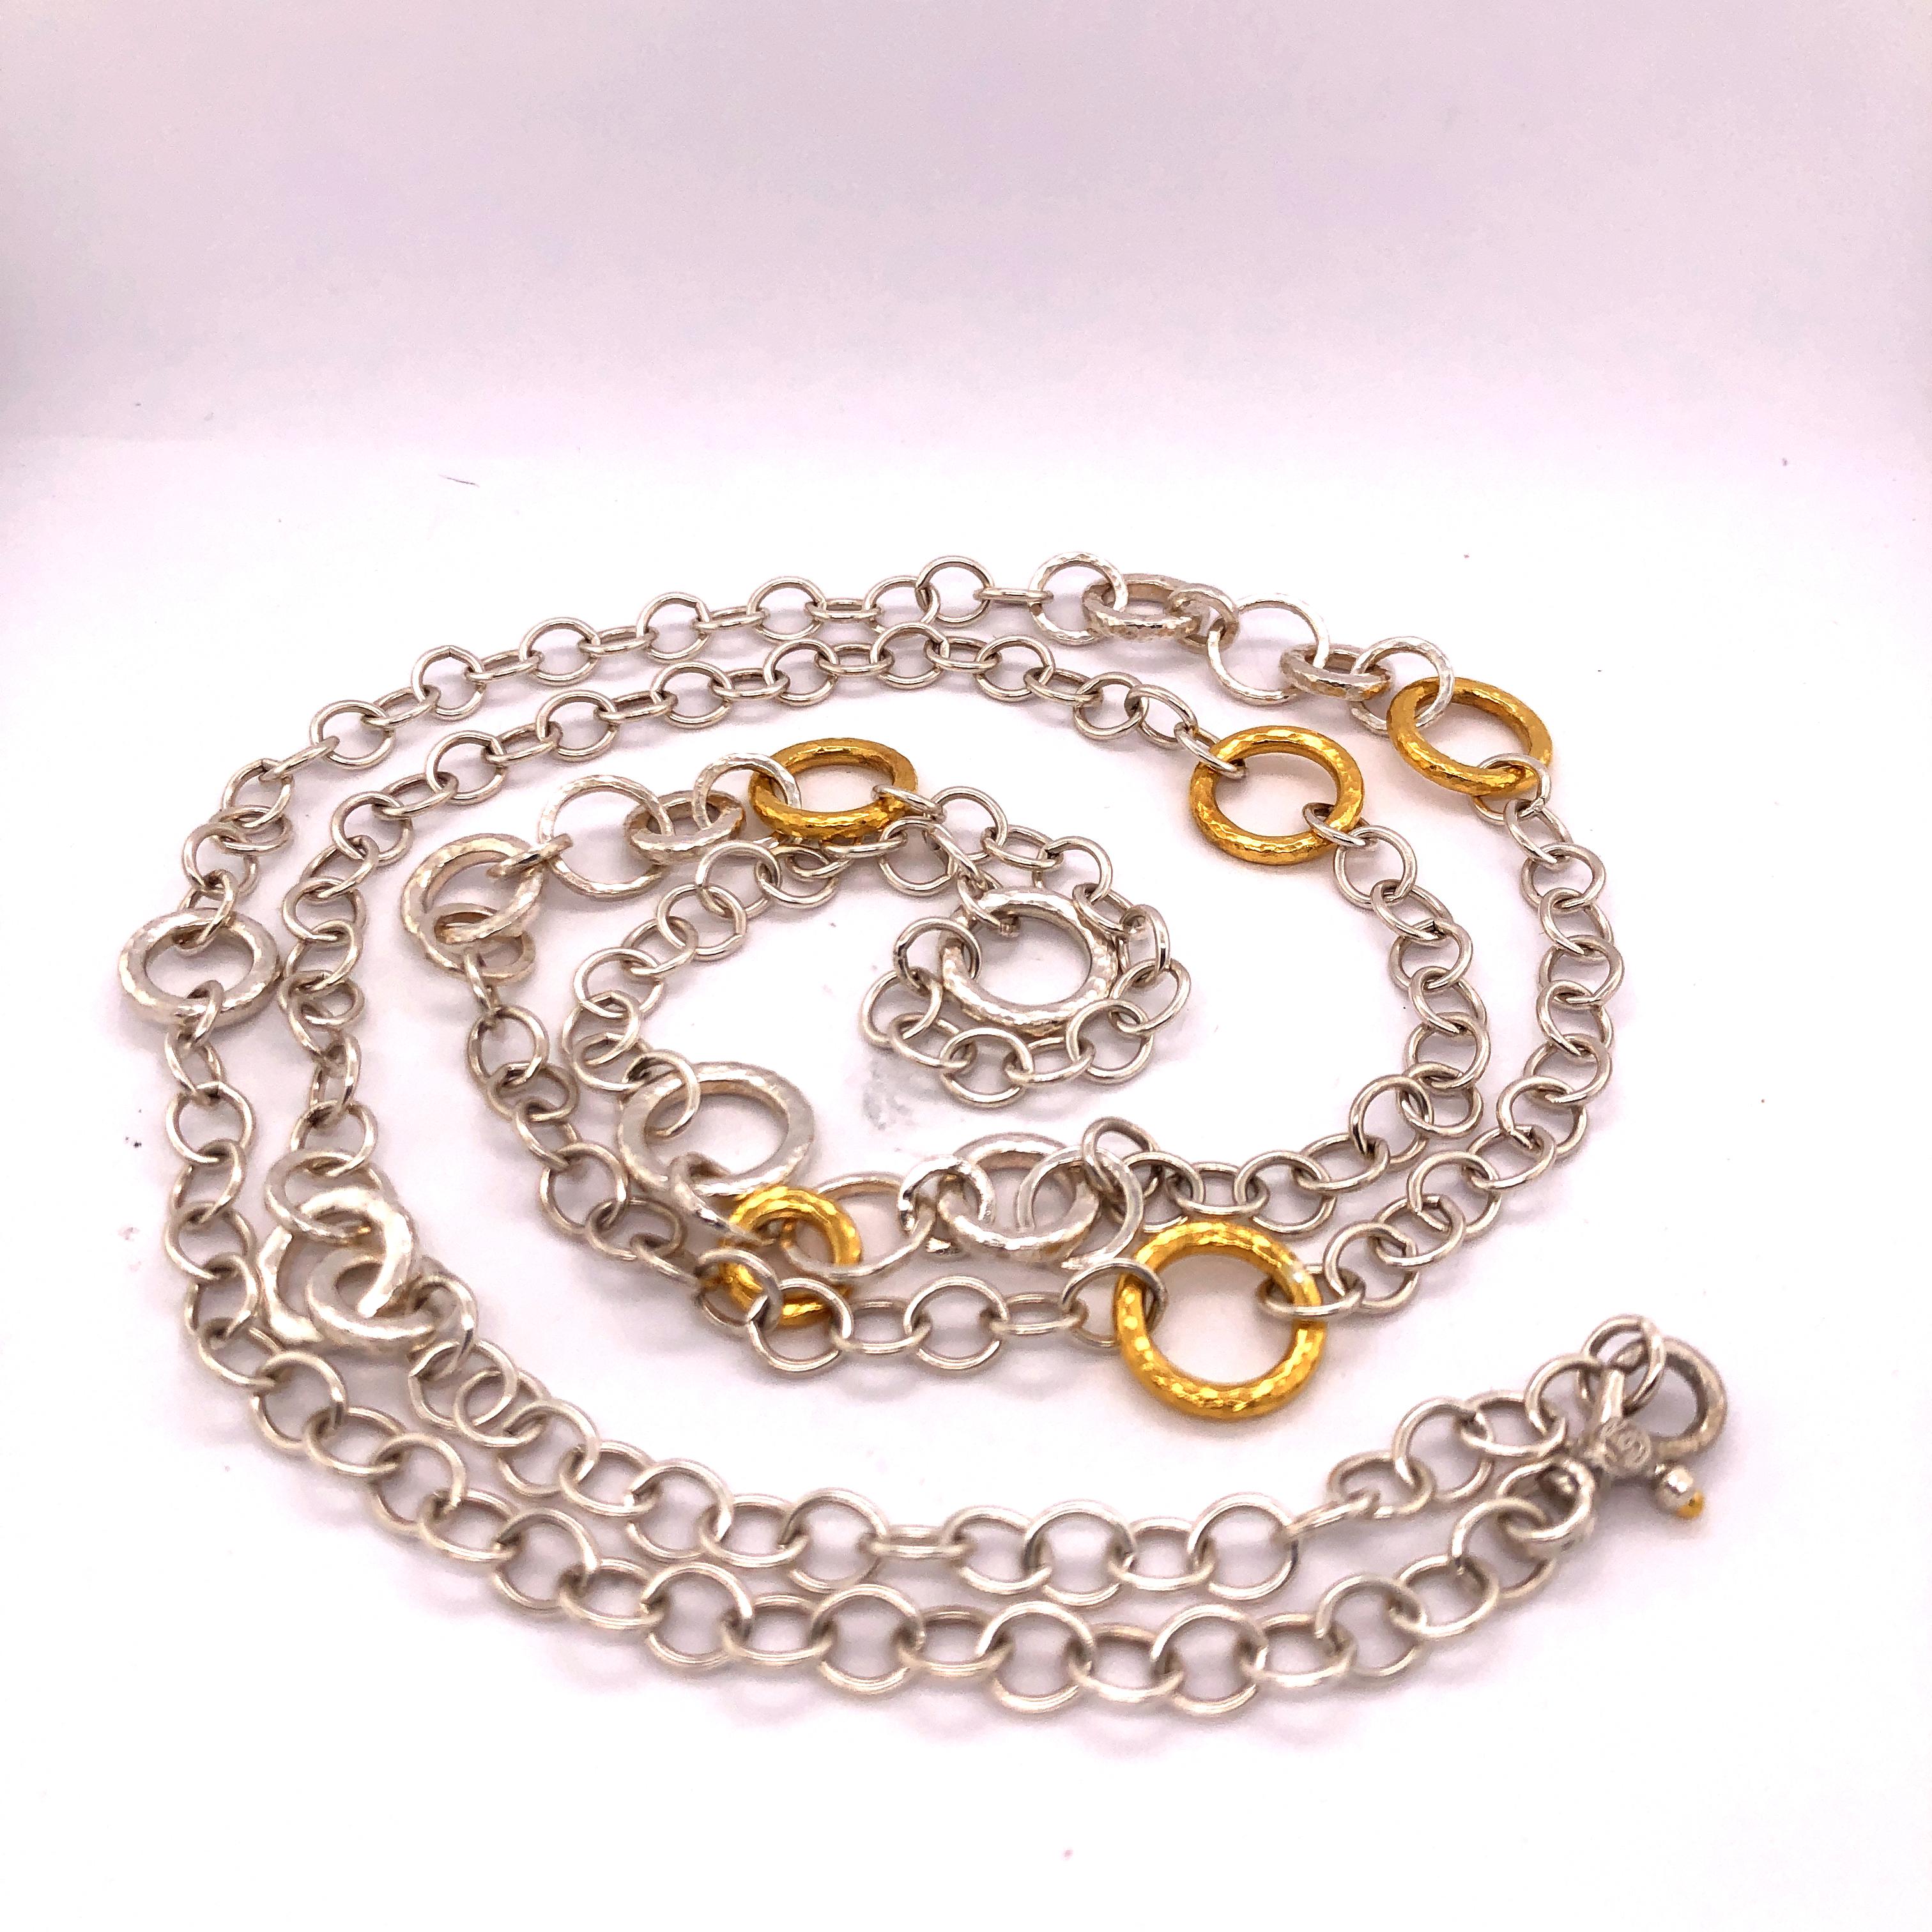 Contemporary Sterling Silver & 24KY Mixed Size Round Link Chain Necklace For Sale